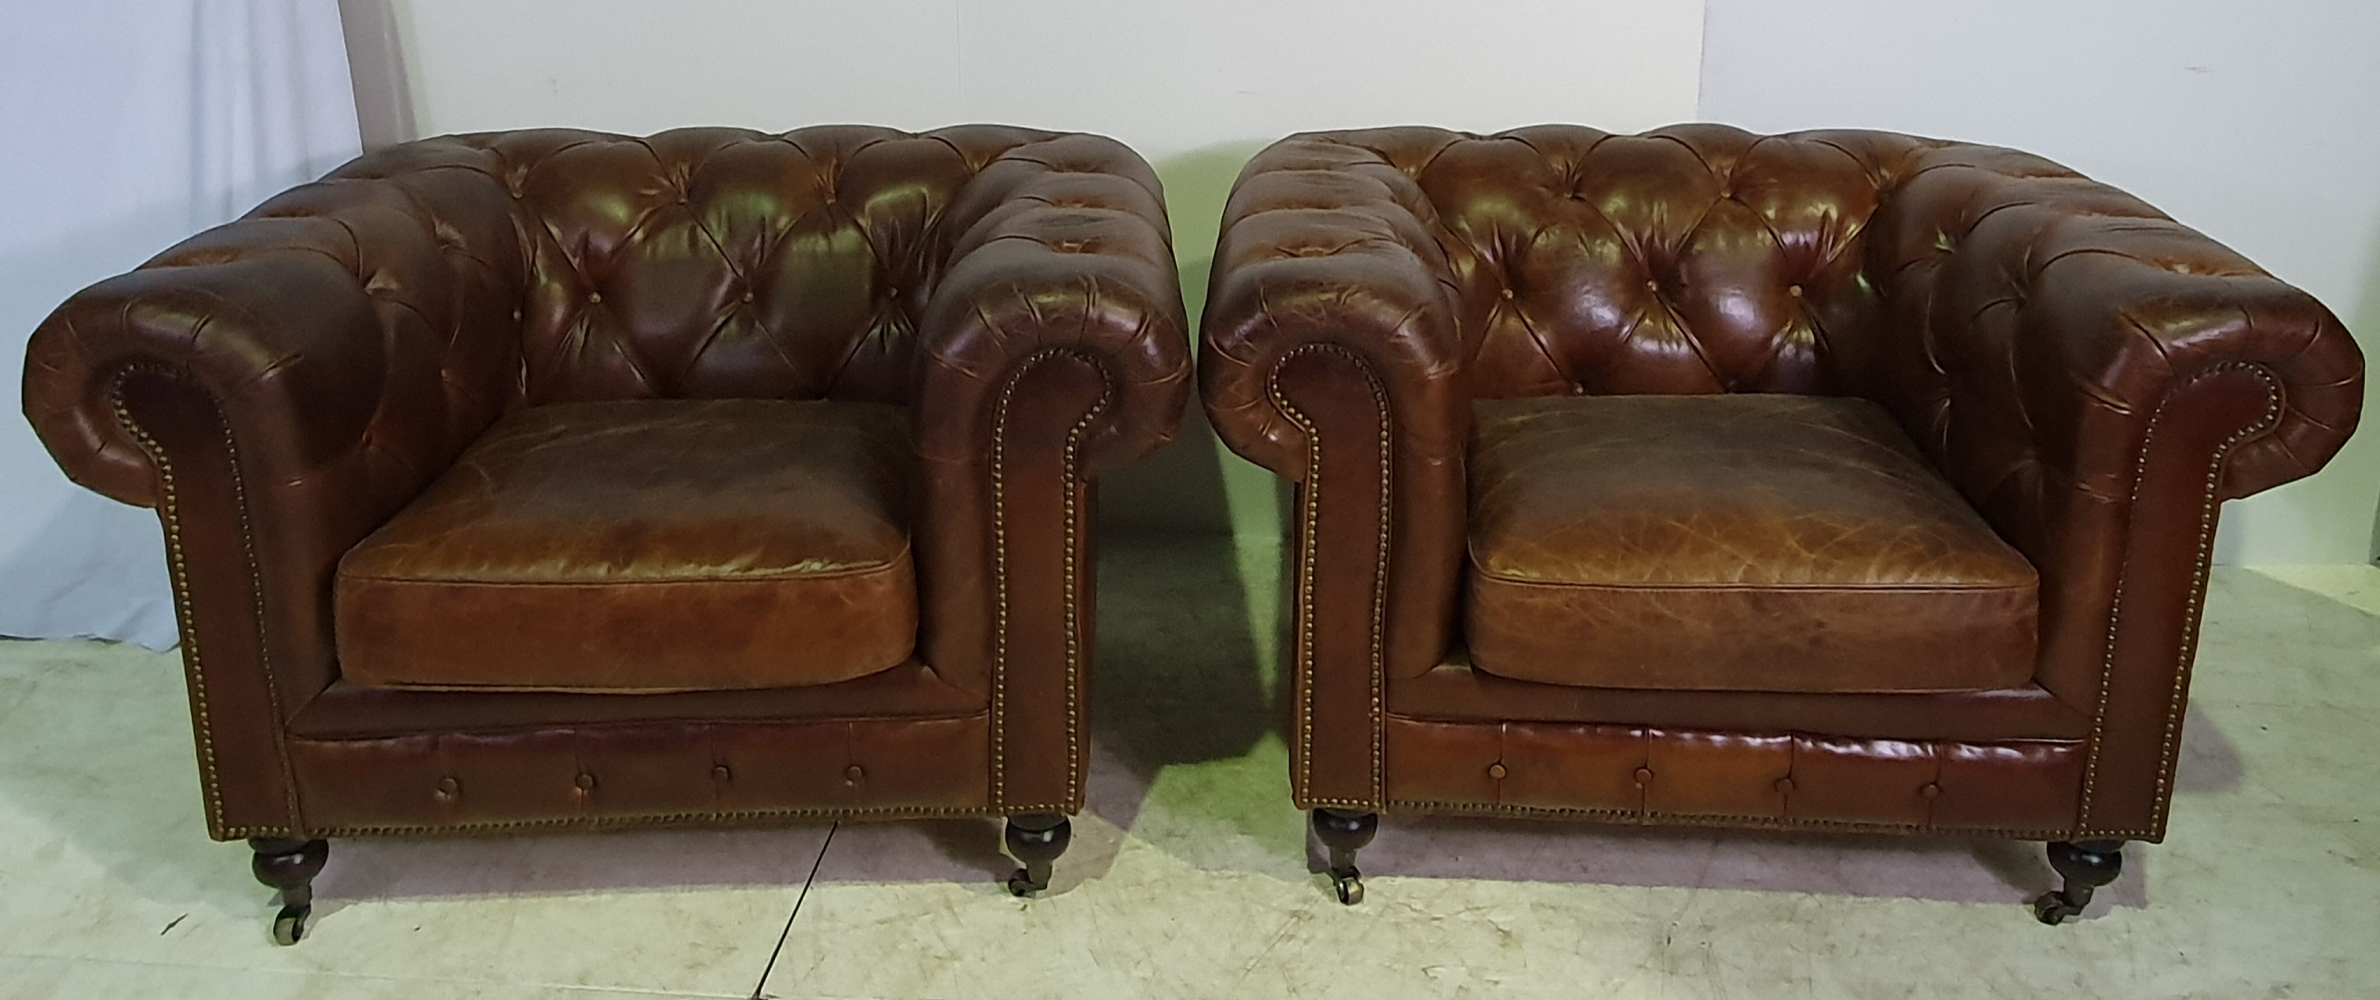 A GOOD QUALITY 20TH CENTURY PAIR OF LEATHER HIDE CHESTERFIELD ARMCHAIRS, with button back and roll